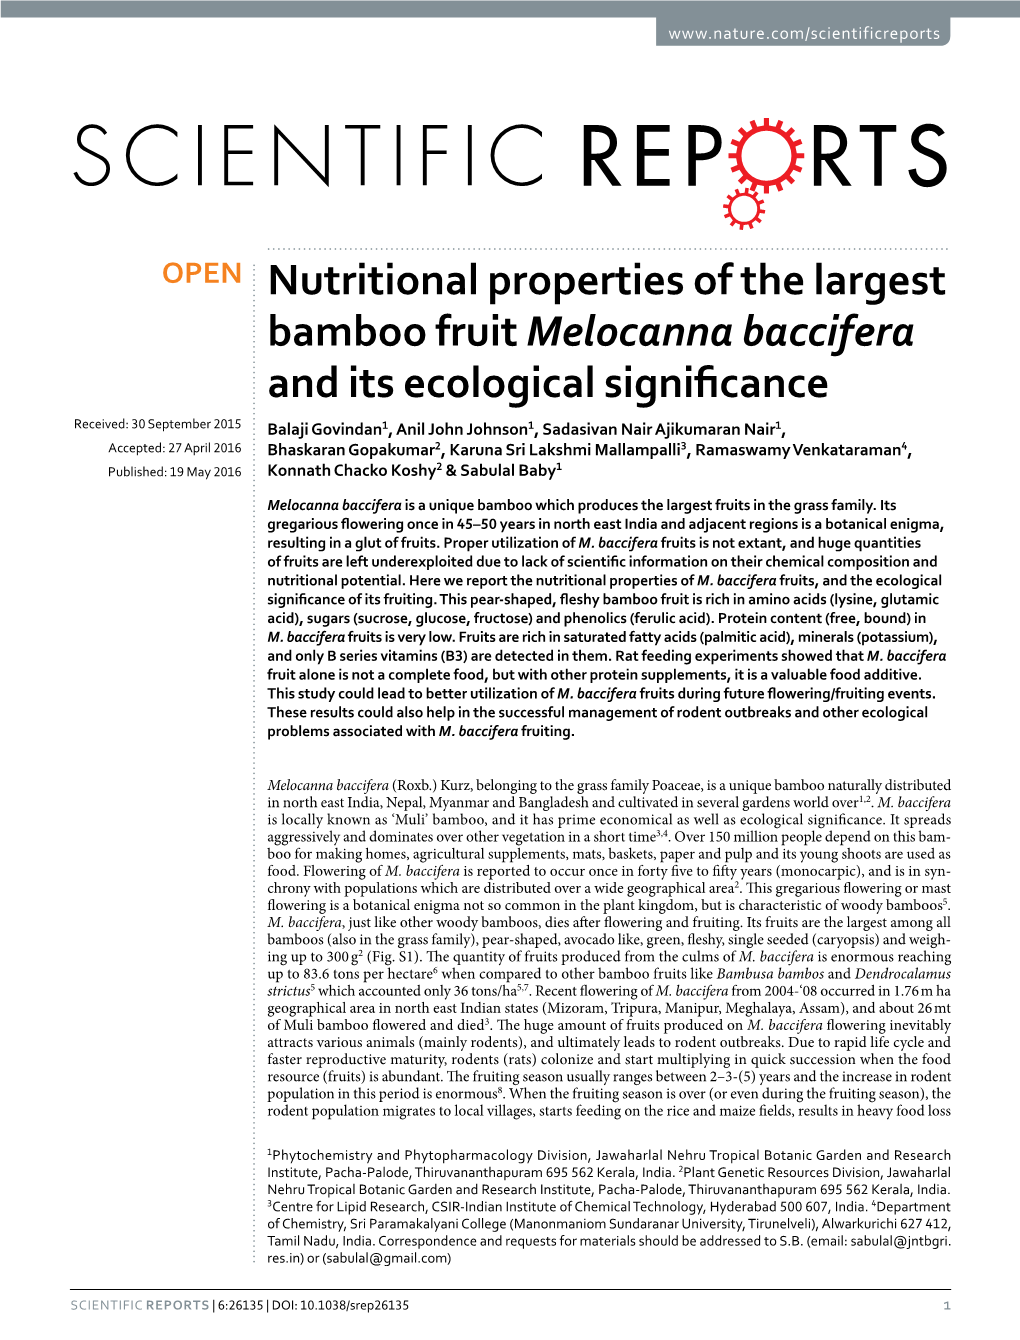 Nutritional Properties of the Largest Bamboo Fruit Melocanna Baccifera